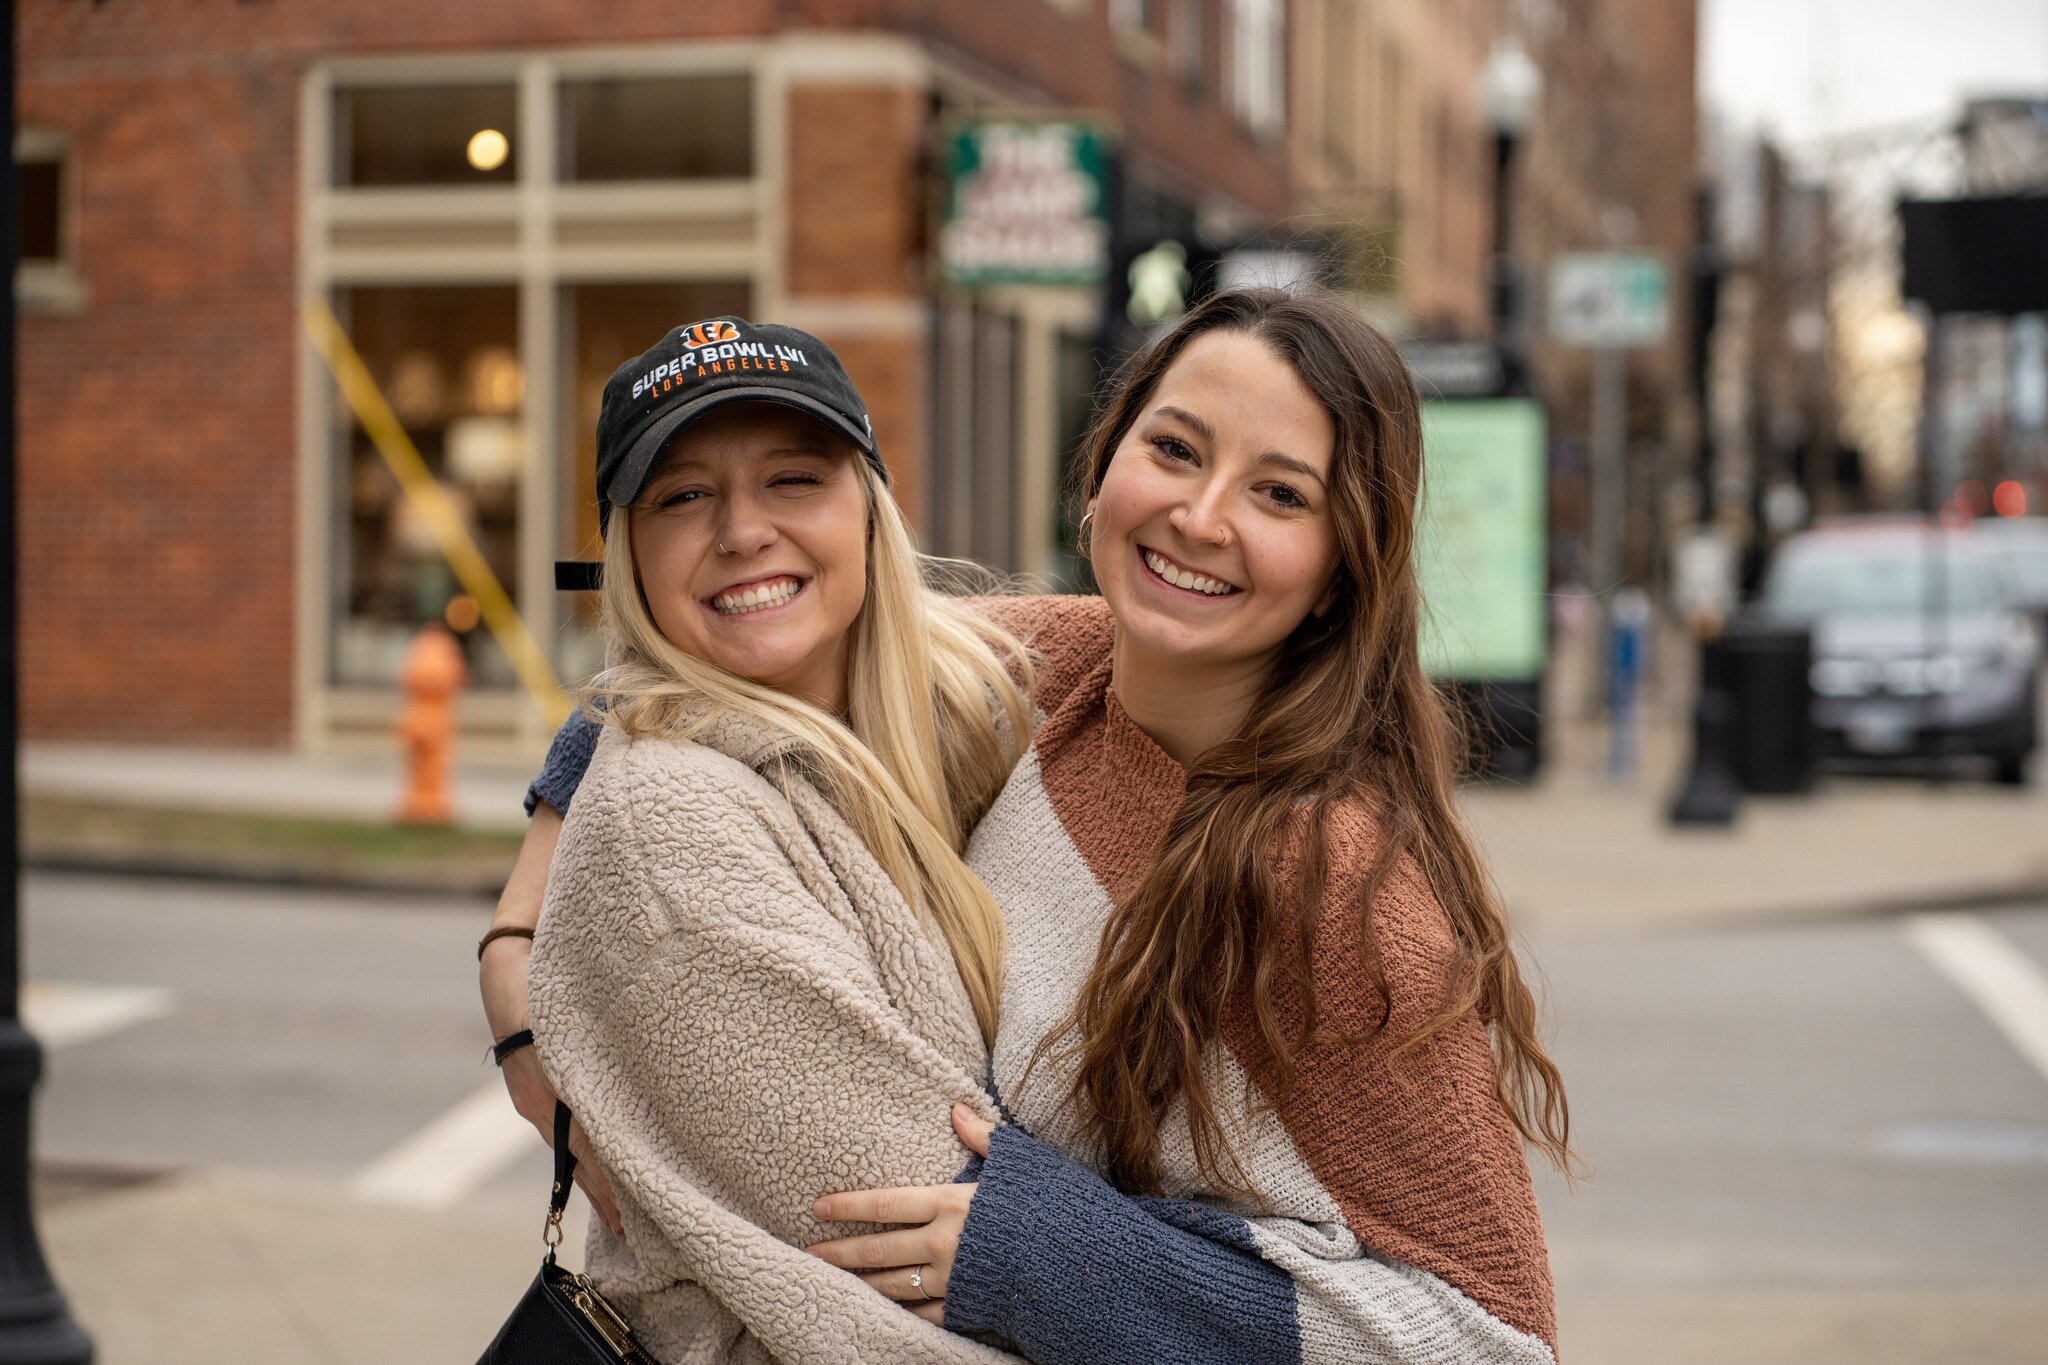 We were out in Columbus the other day shooting in Short North when these two came up to us feeling the vibe. They asked what we were taking pictures of and then agreed to let us snap a few quick photos of them. We didn't even get their names but than